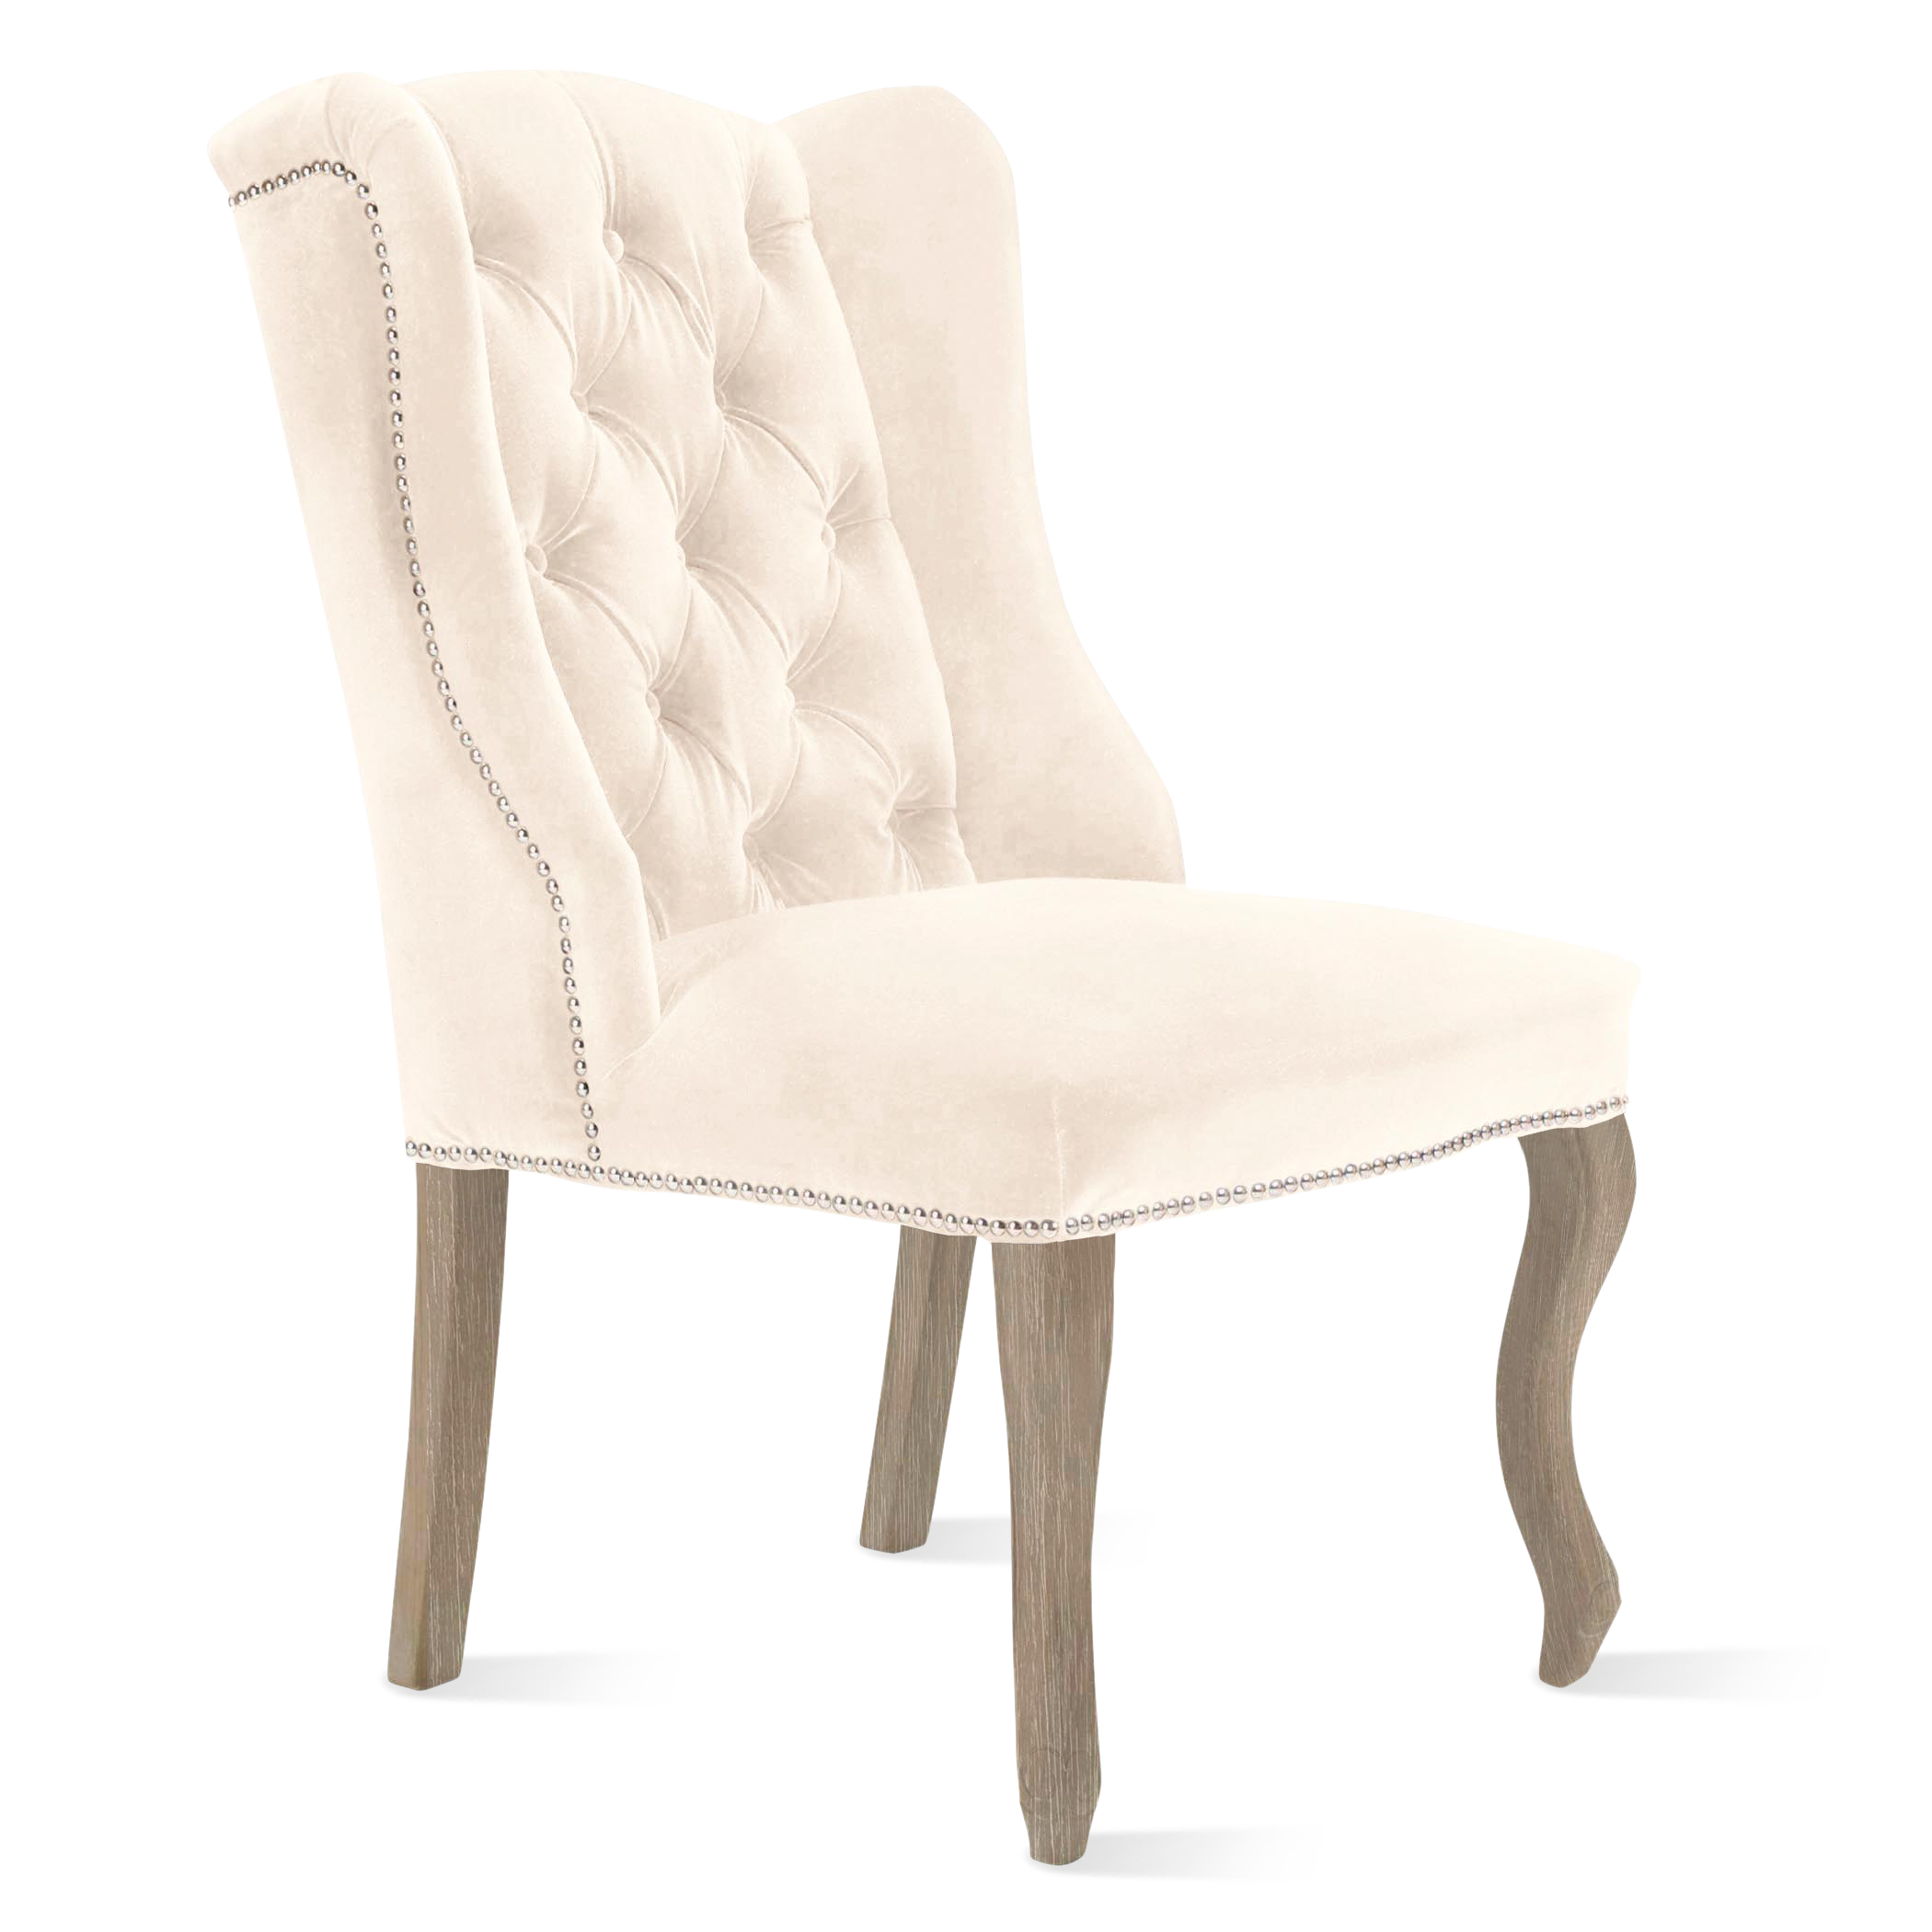 Archer Dining Chair - Natural Grey